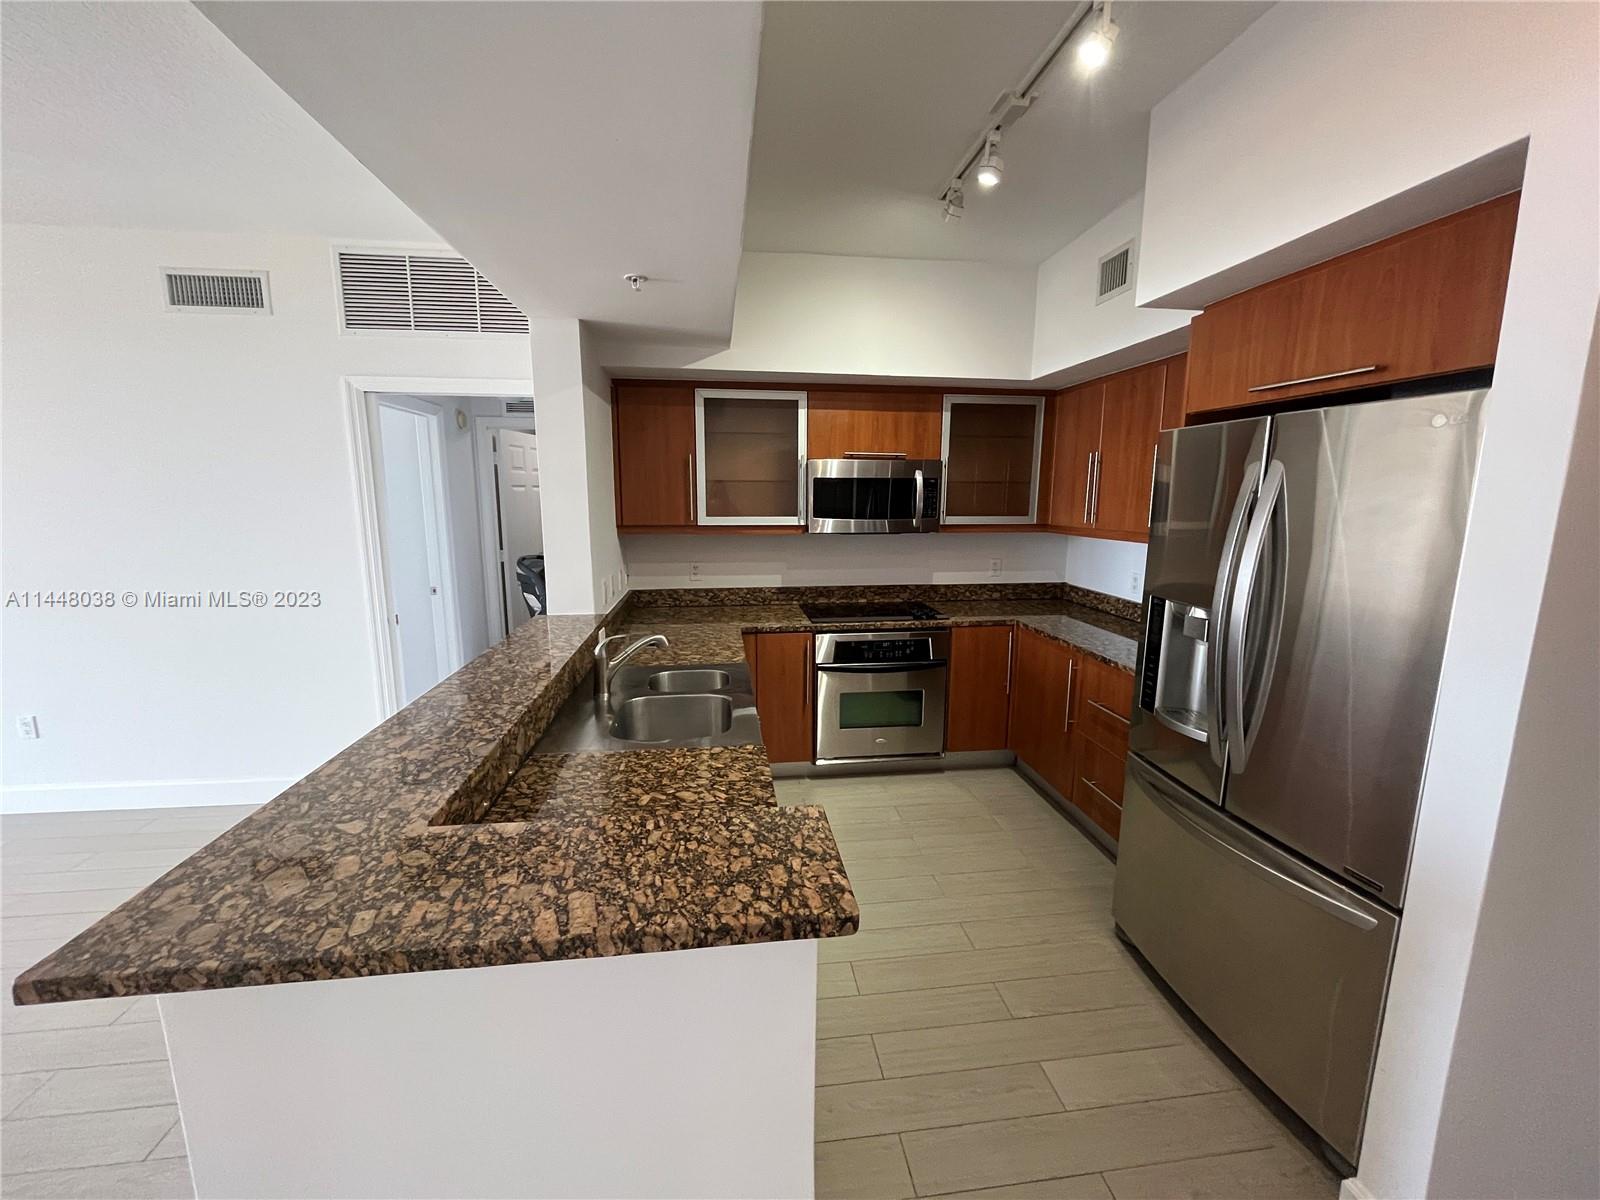 Stunning 2/2 unit in the heart of Coral Gables. Great investment opportunity. Includes big storage 4x4x7.5 inside the building. Brand new A/C and water heater from 2022. Unit rented until September 2024 GREAT tenant paying $3400, association monthly fee $1118.84. Maintenance includes: water, trash, package receiving, wifi, cable, 2 parking spots, complementary valet parking. Association allows rents every 6 month. Text Jessica for video